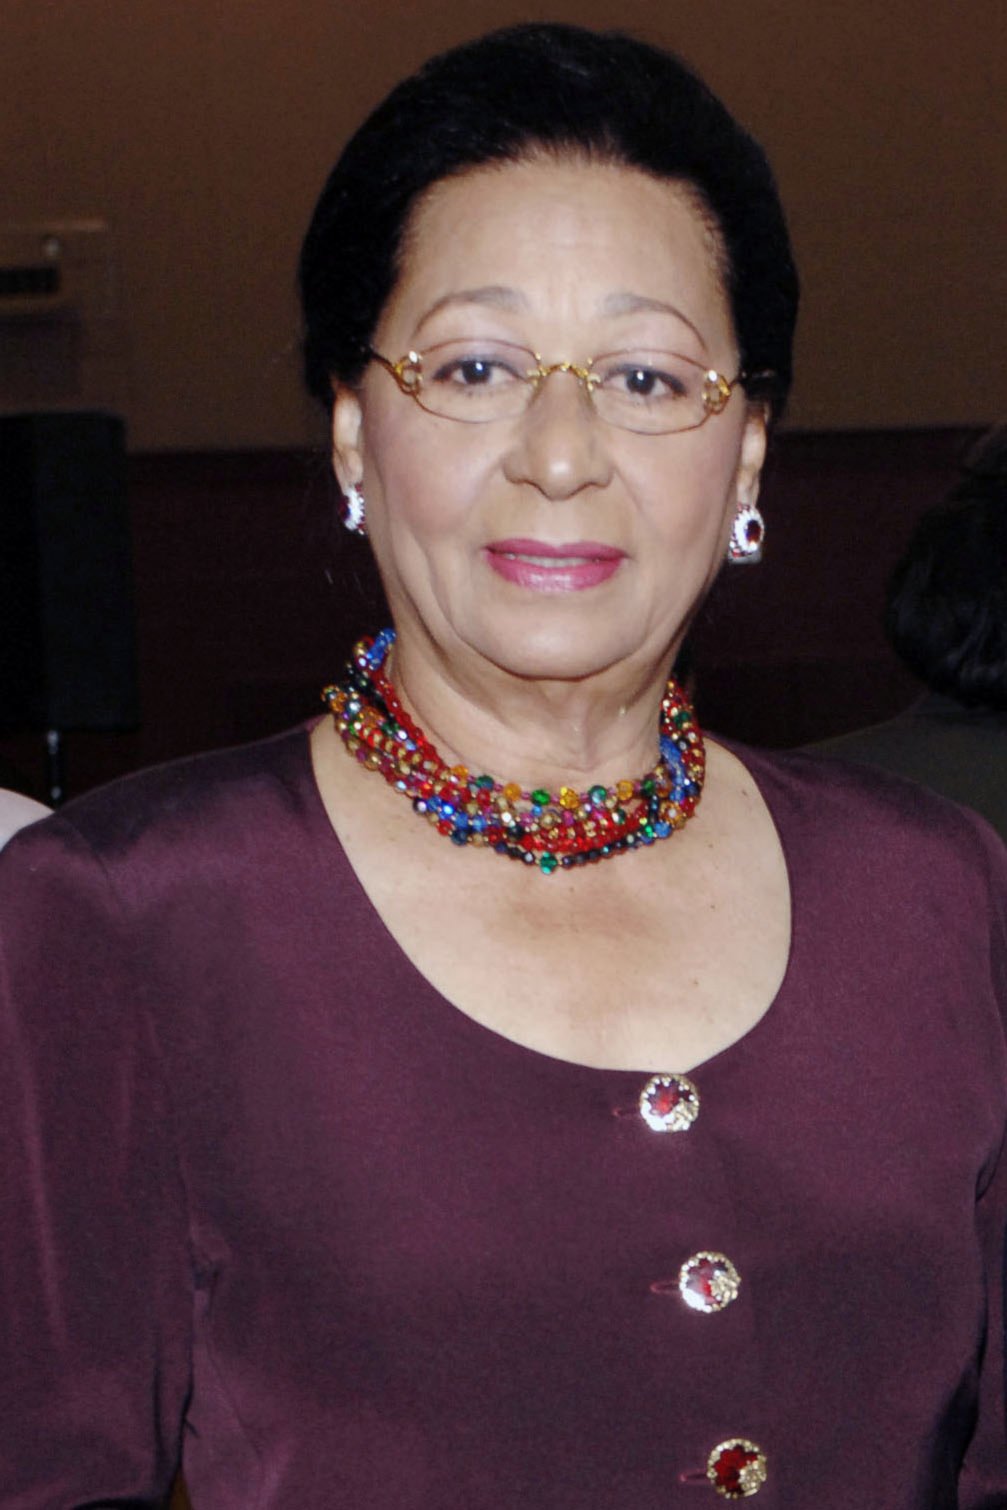 PHOTO: Marguerite Pindling, Feb. 26, 2007, during the  International Civil Rights Walk of Fame at the Martin Luther King Jr. National Historic Site in Alanta, Georgia. Pindling became the Governor-General of the Bahamas, July 8. 2014.